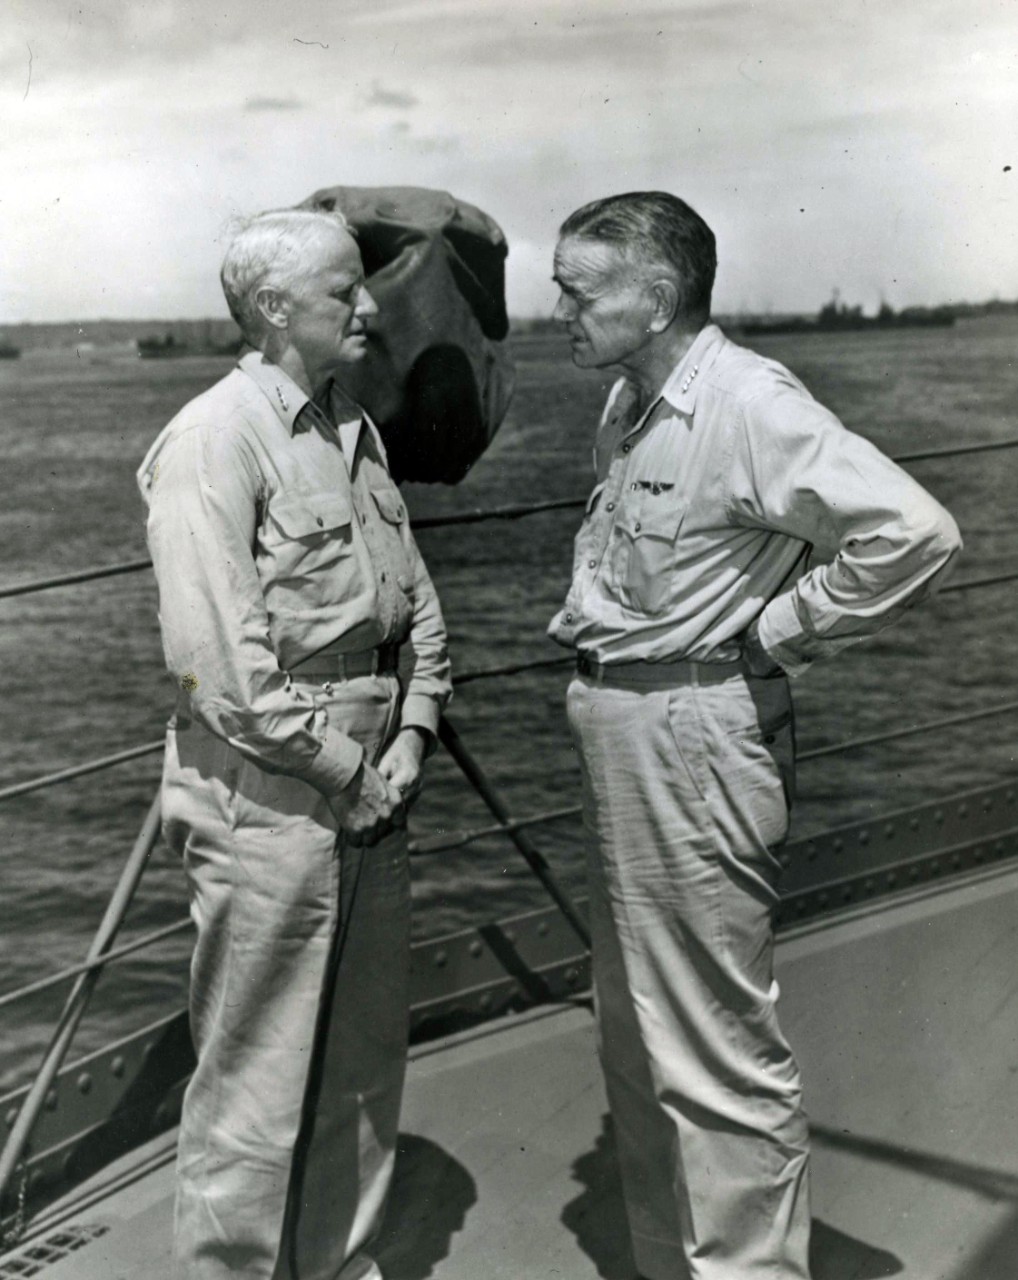 Admiral Chester W. Nimitz, USN, Commander in Chief Pacific and Pacific Ocean Areas (left), and Admiral William F. Halsey, USN, Commander, South Pacific Area and South Pacific Force, confer aboard USS Curtiss (AV-4) at "Button" Naval Base, Espirit...